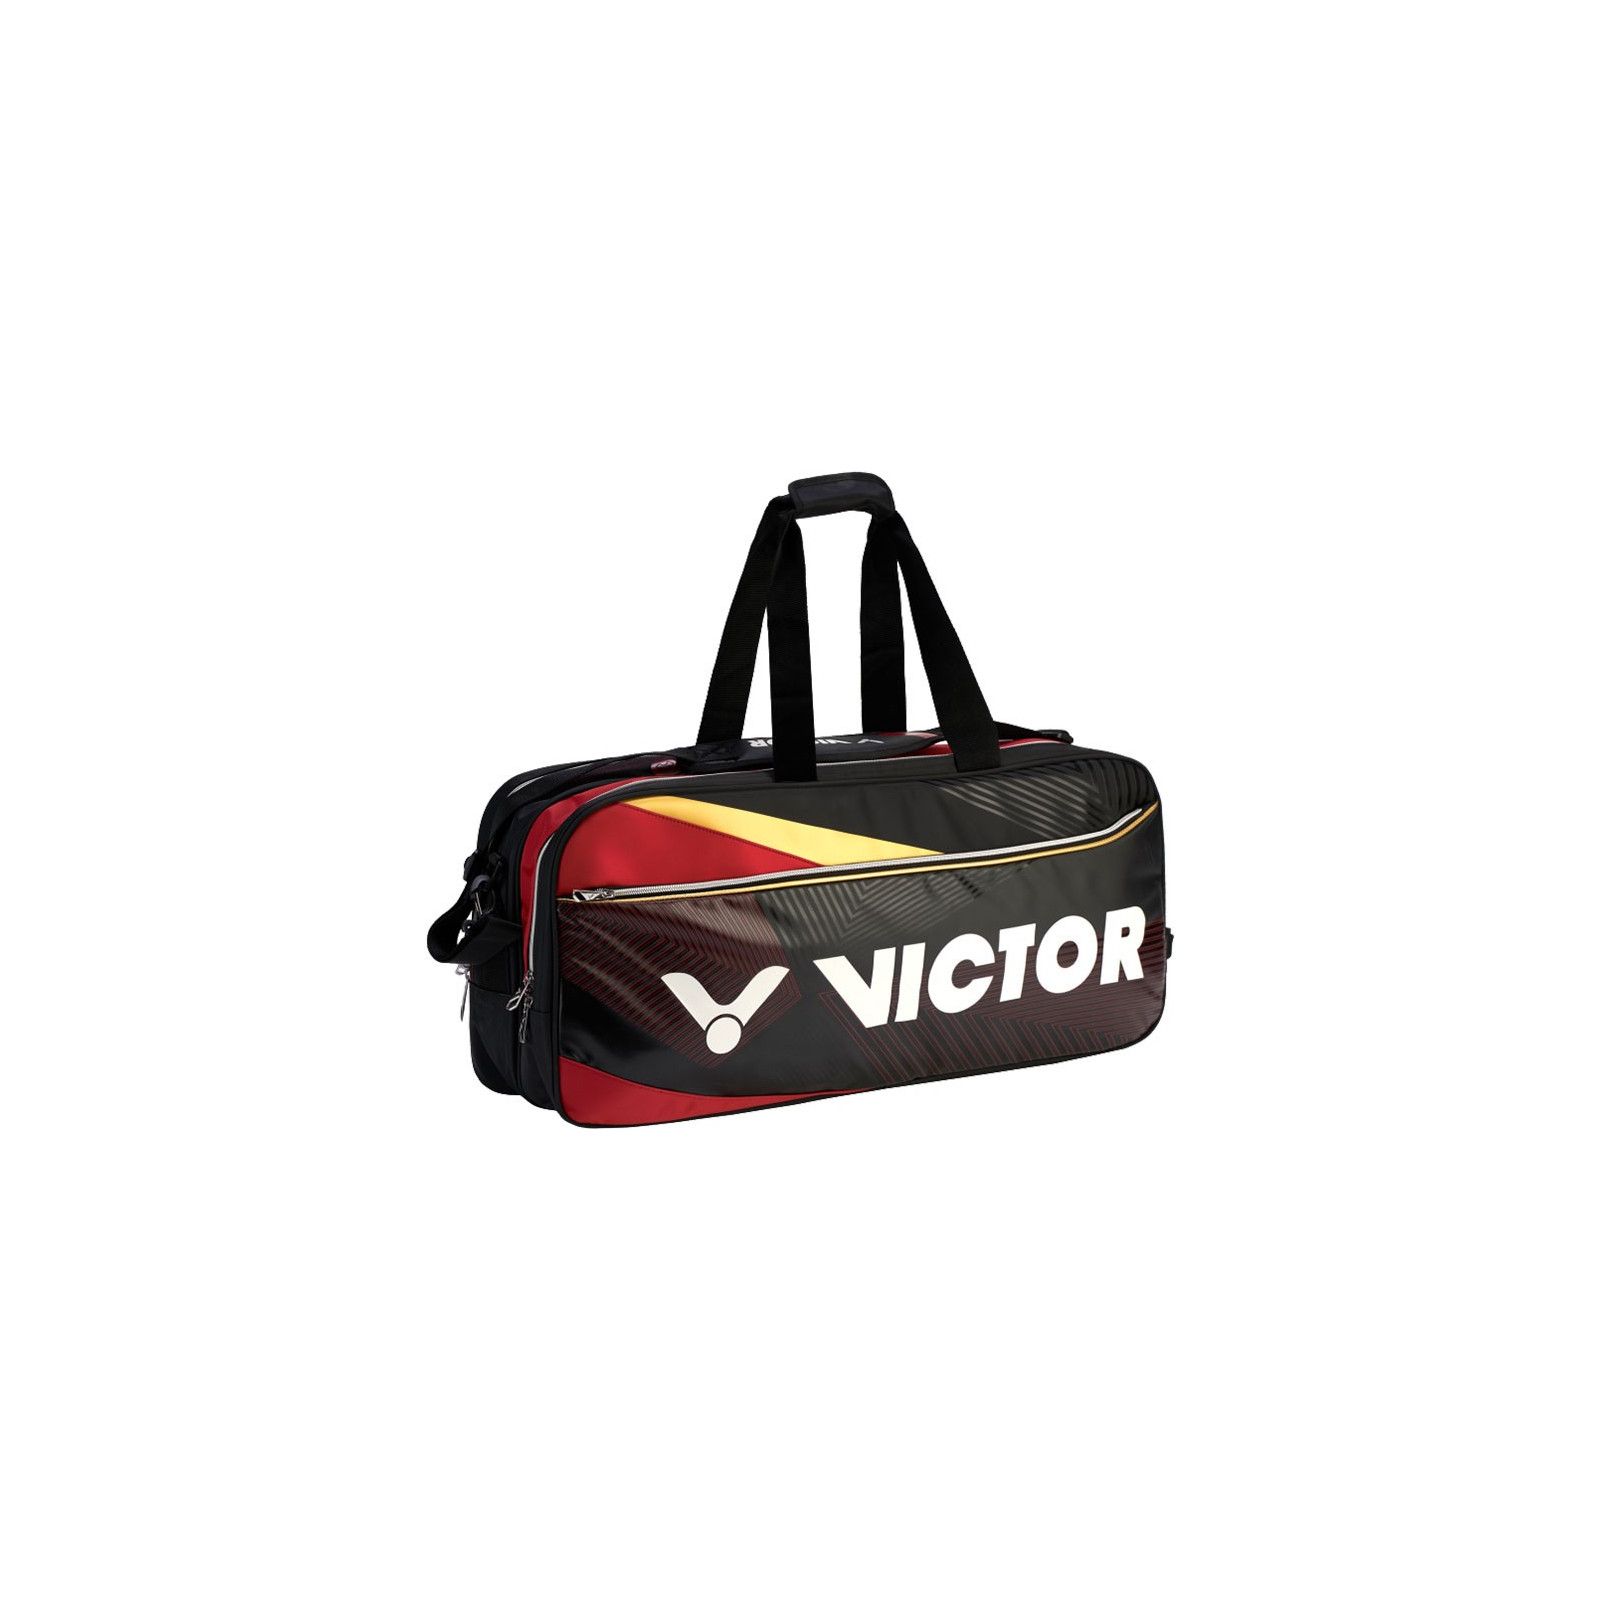 Victor Sac Rectangulaire BR 9609